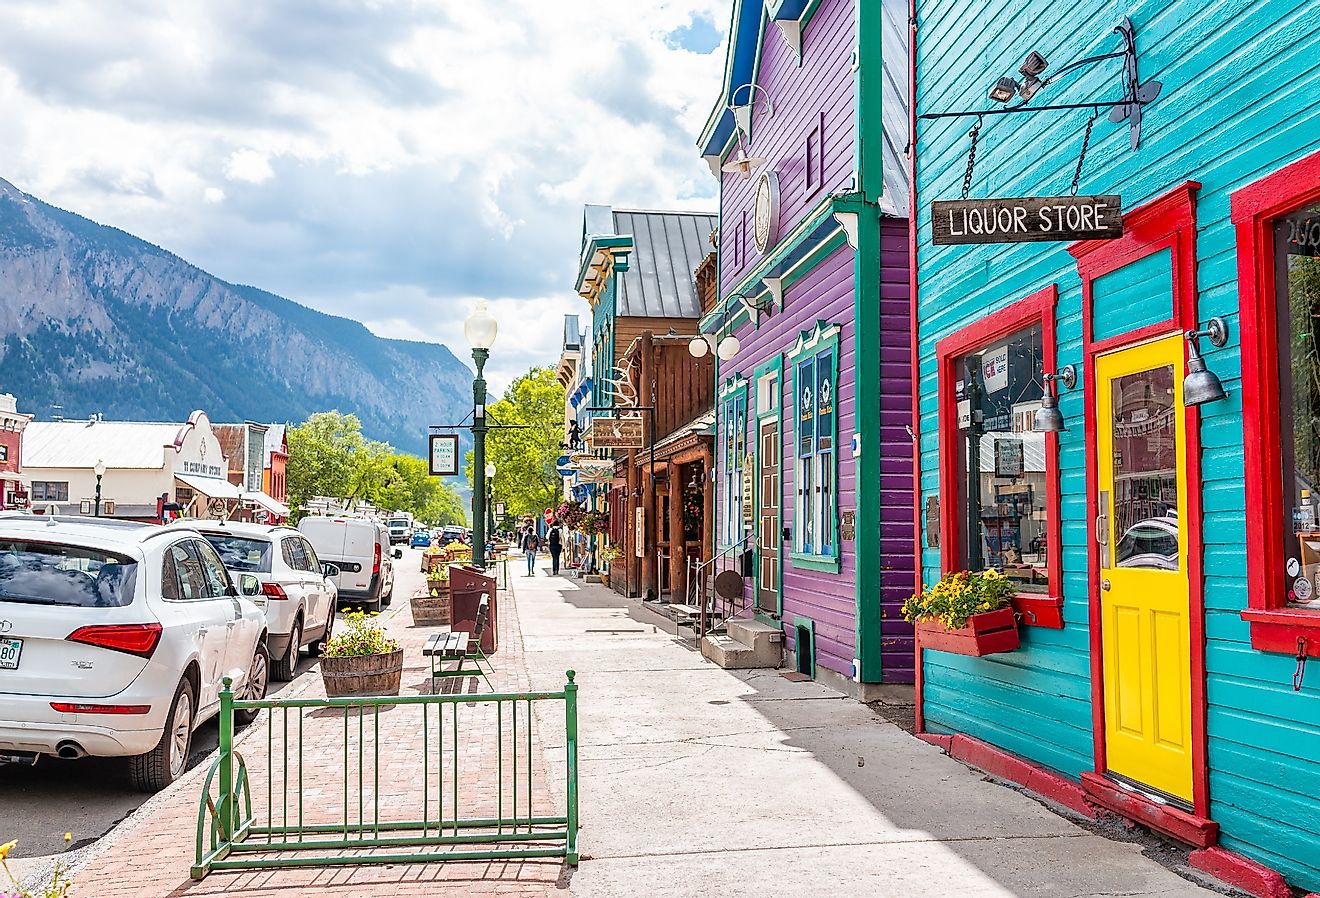 Village houses and stores in downtown Crested Butte, Colorado in summer. Image credit Kristina Blokhin via stock.adobe.com